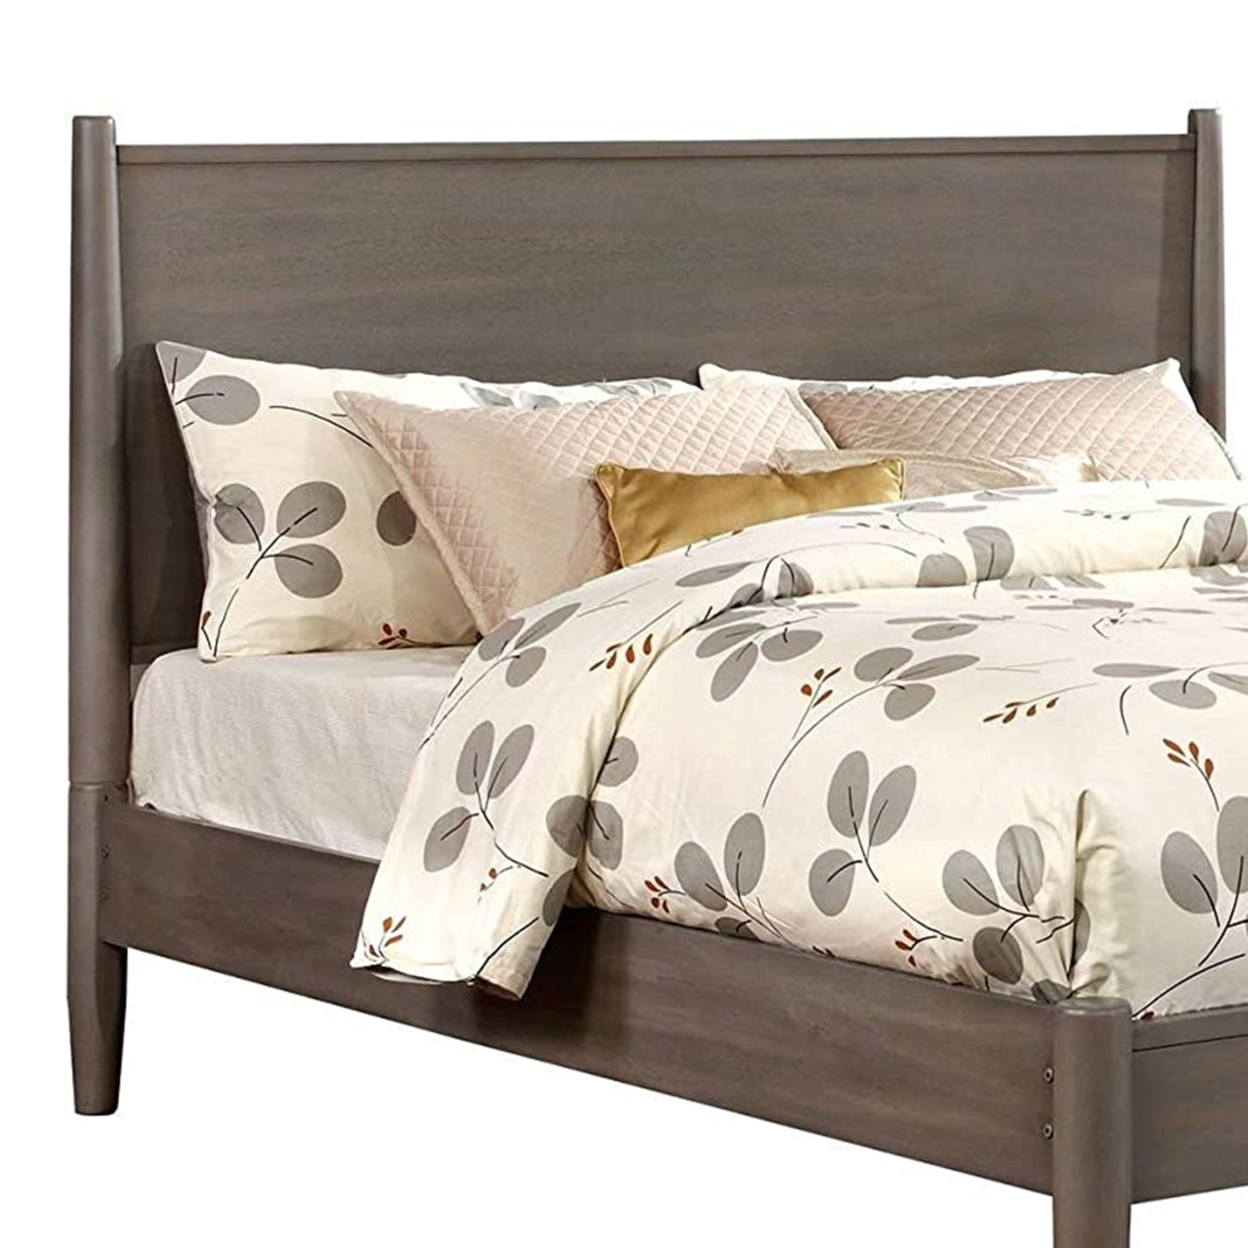 Mid Century Modern Wood Queen Bed With Round Tapered Legs, Gray- Saltoro Sherpi